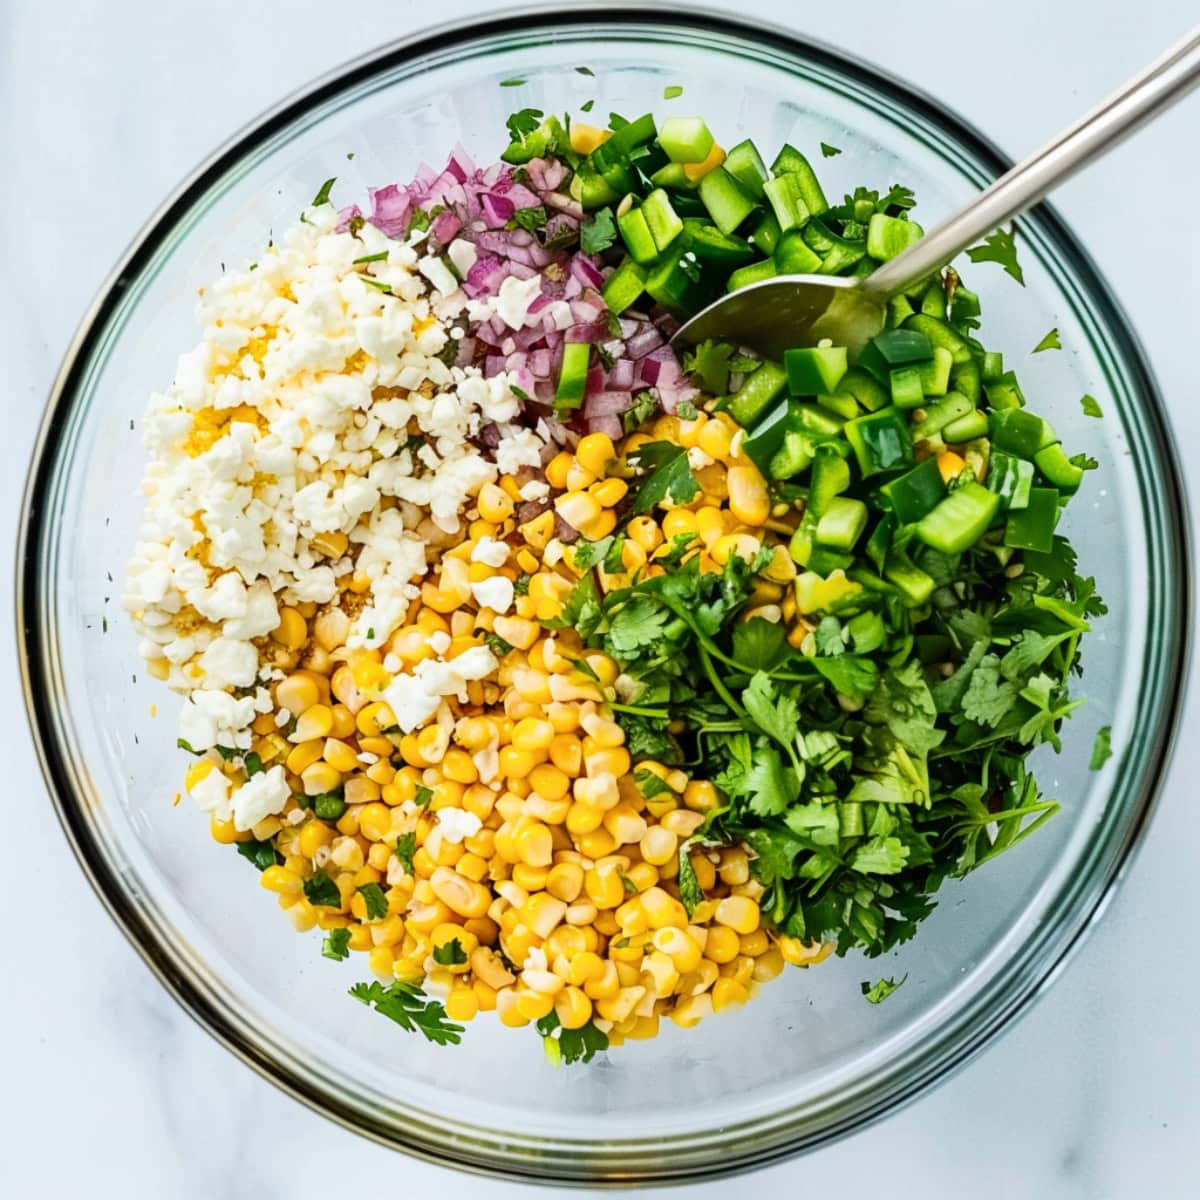 Corn, cilantro, chopped jalapeno, chopped red onions, and crumbled cheese in a glass bowl.